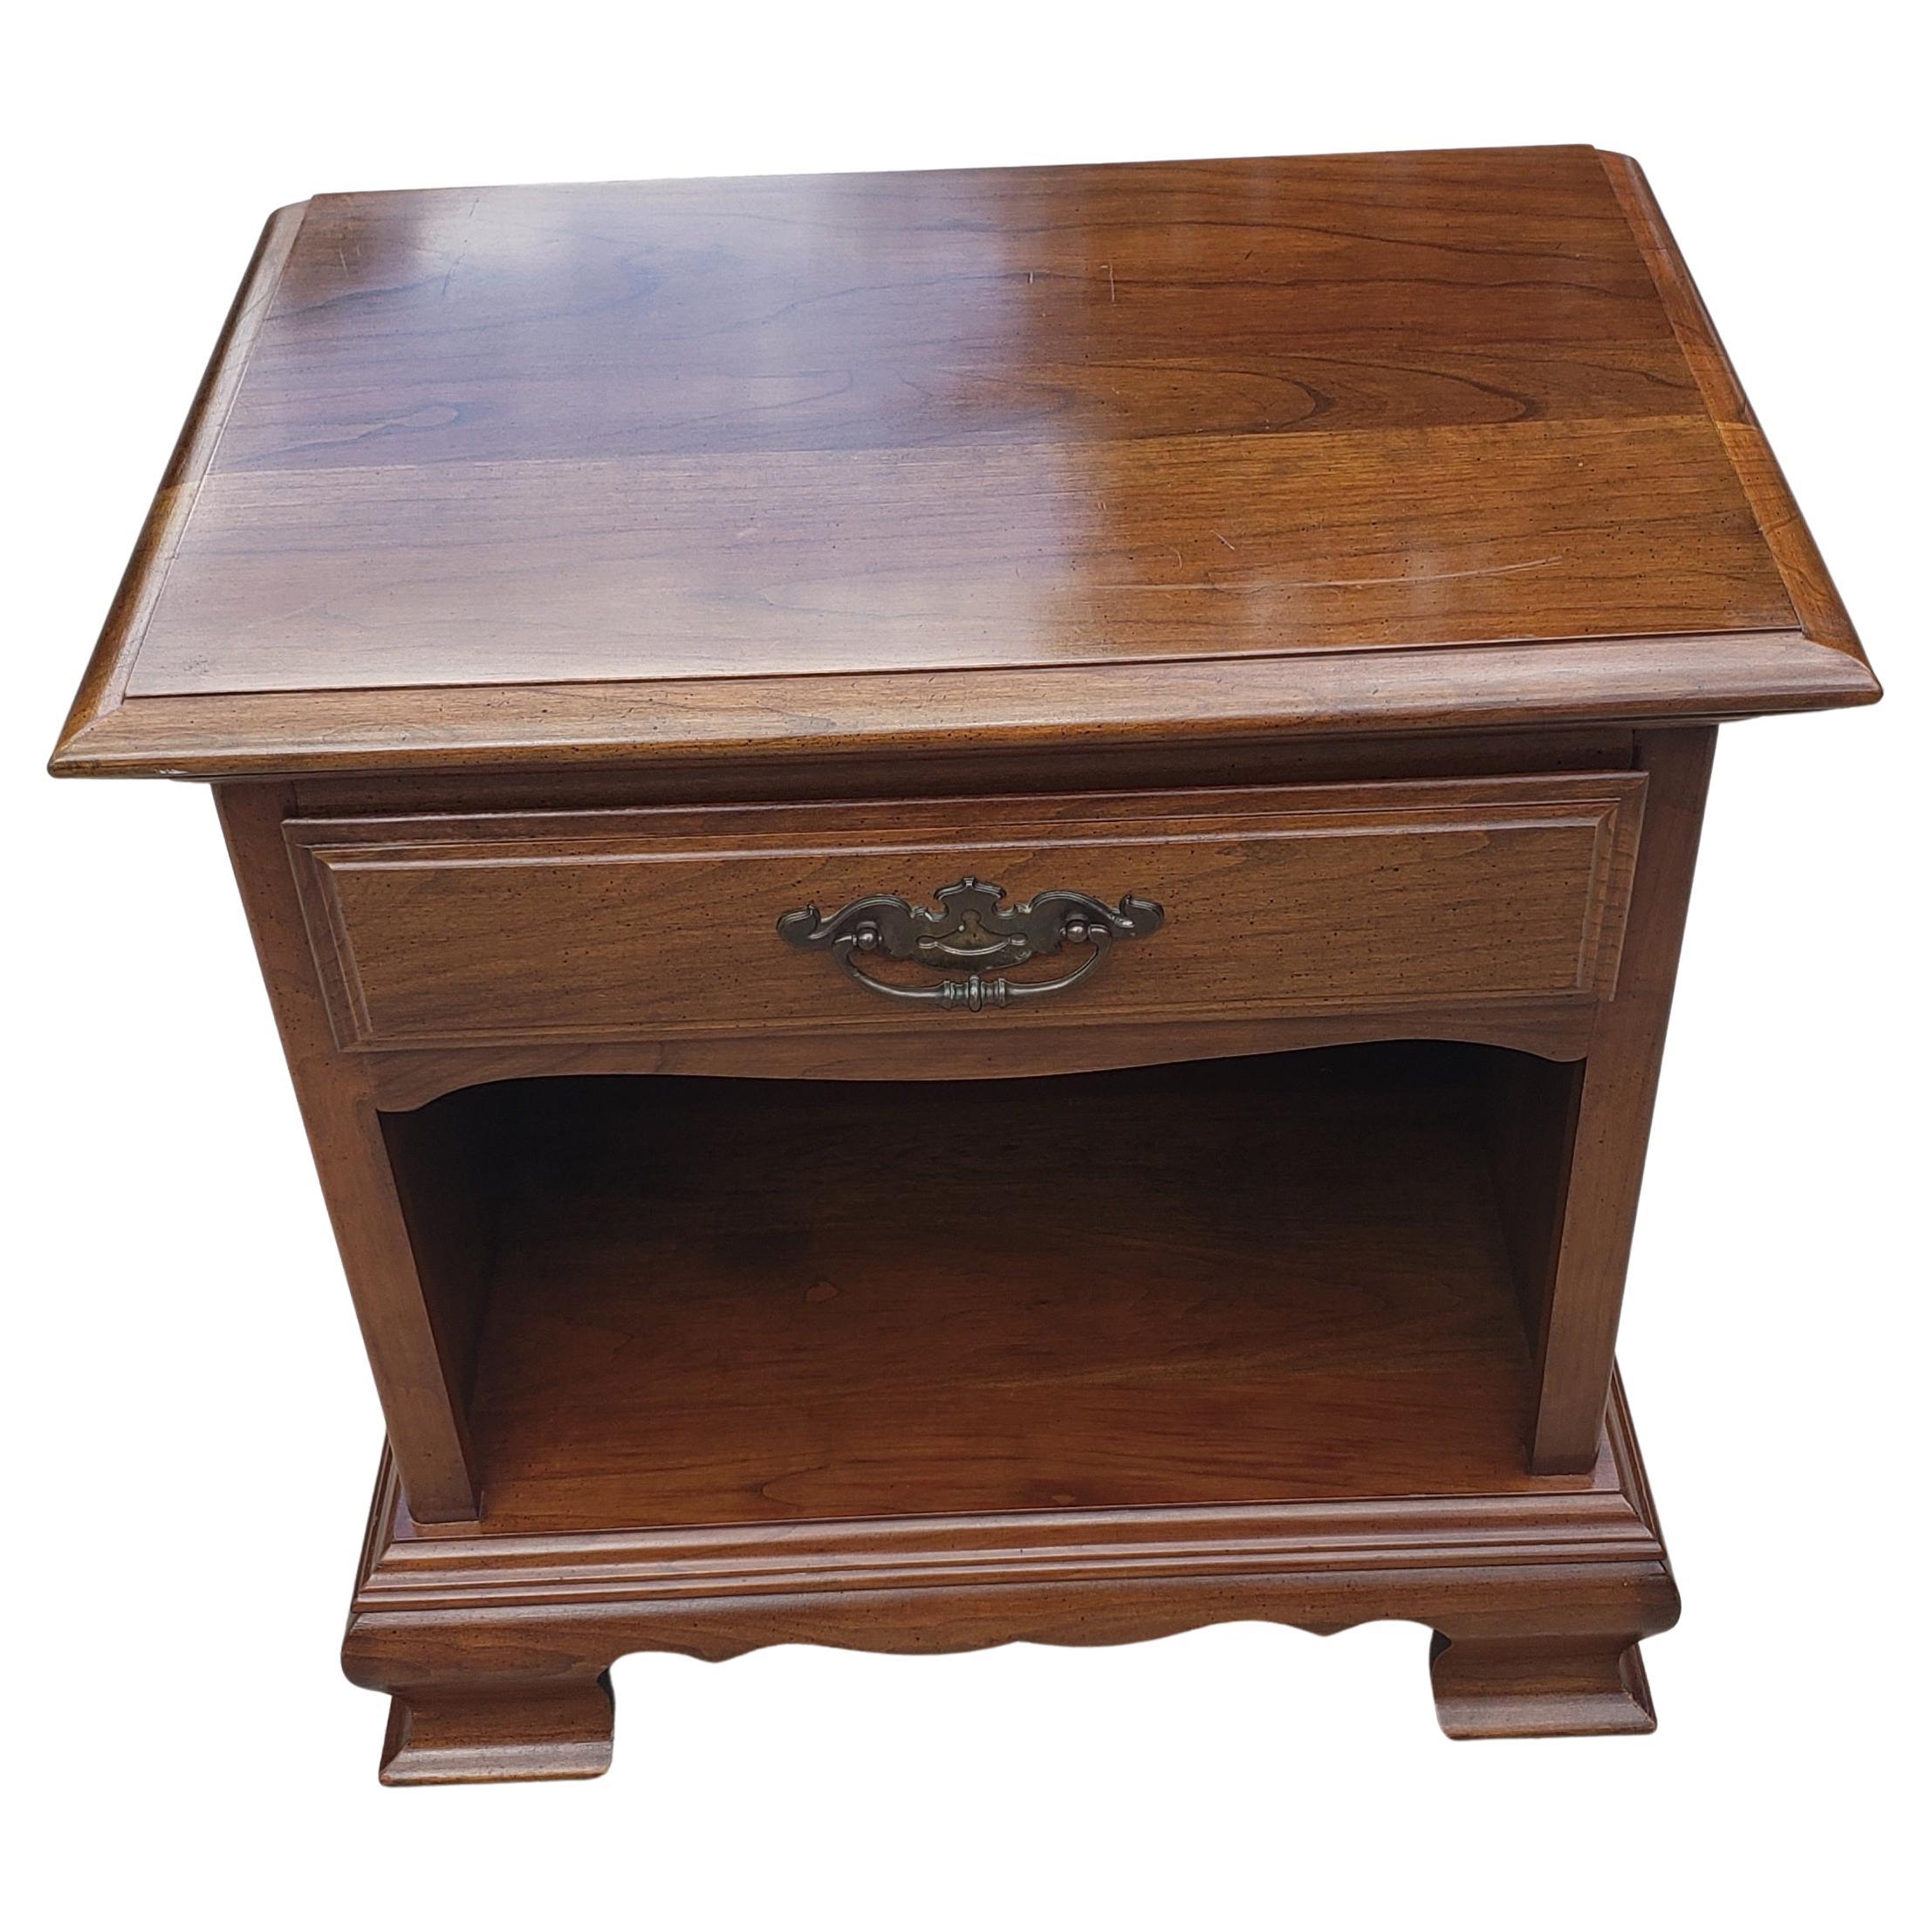 A Stanley Furniture solid cherry single drawer bedside table nightstand in good vintage condition. Single Dovetail drawer.
Measures 24